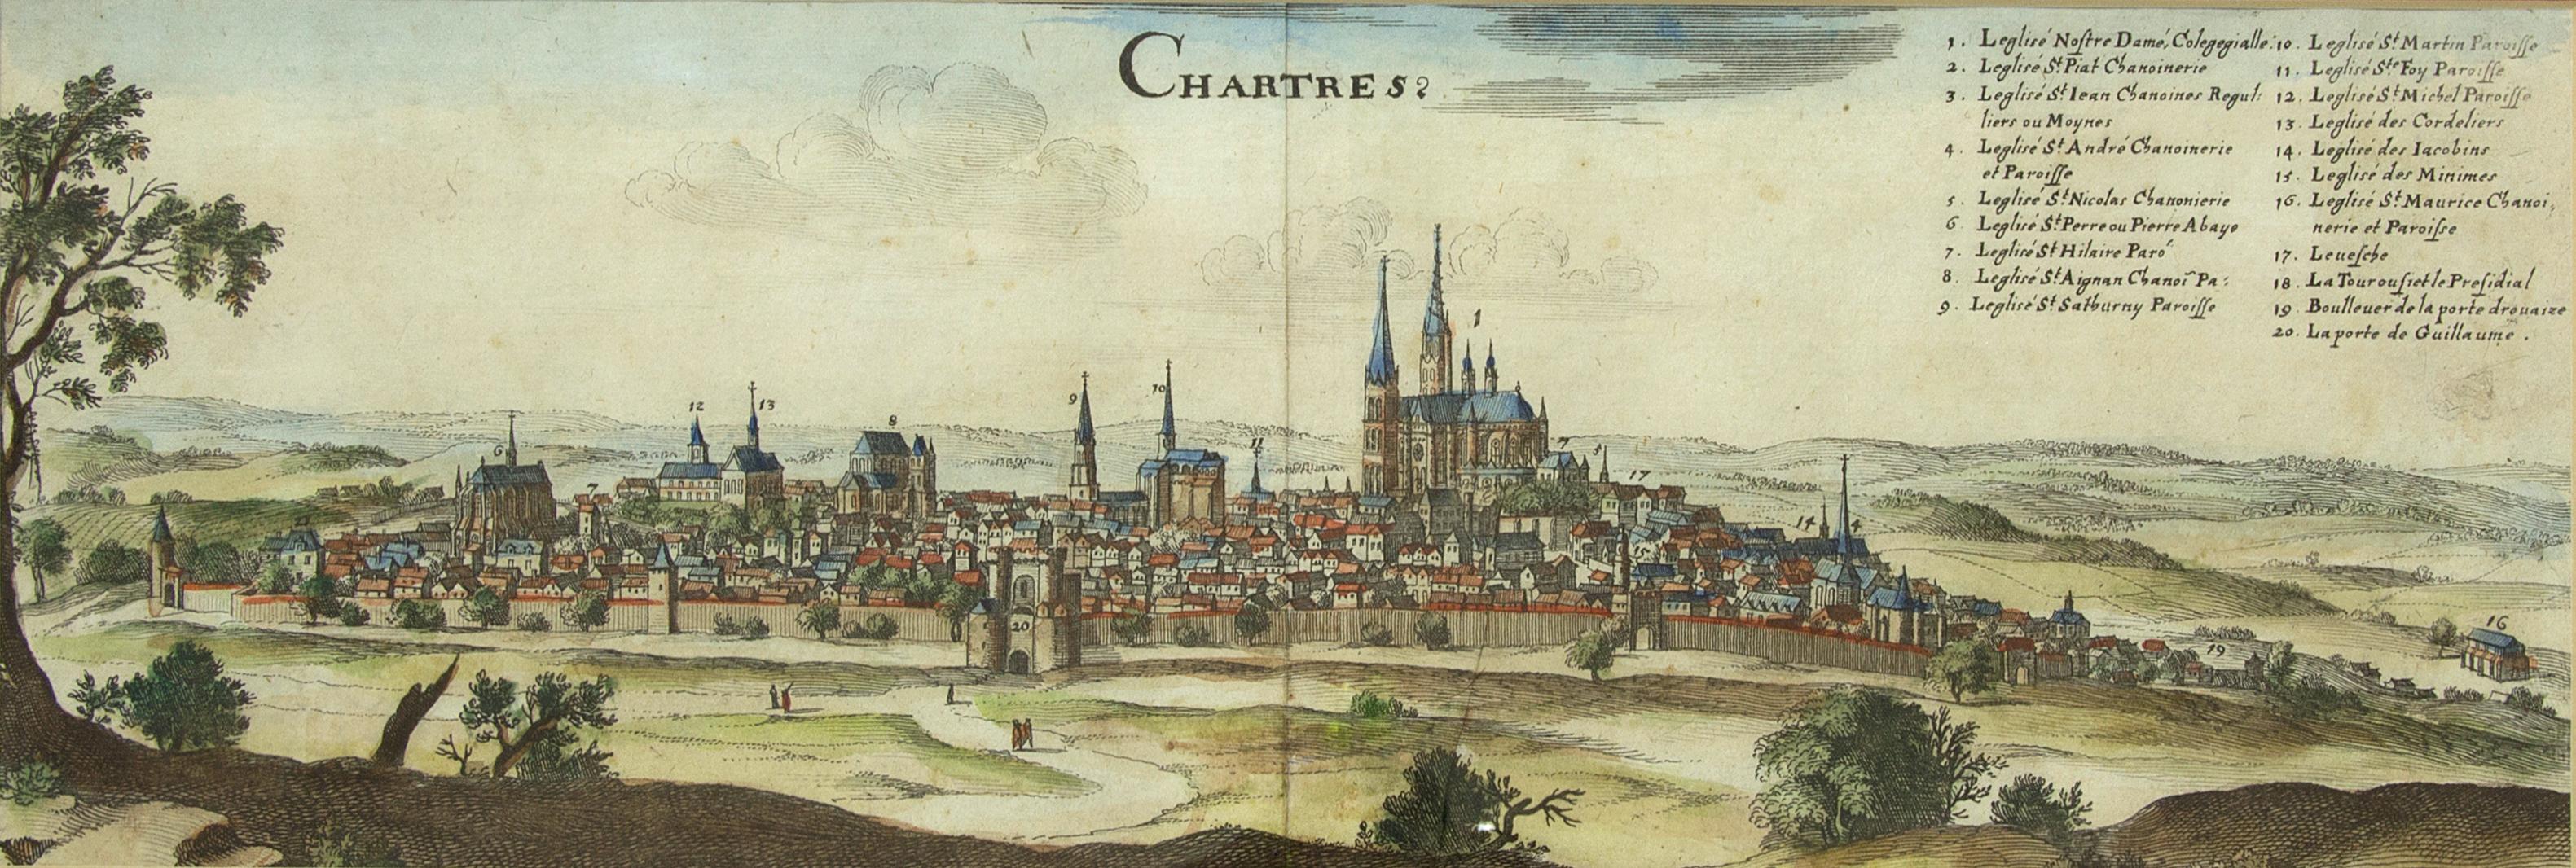 View of Chartres, France - Print by Unknown